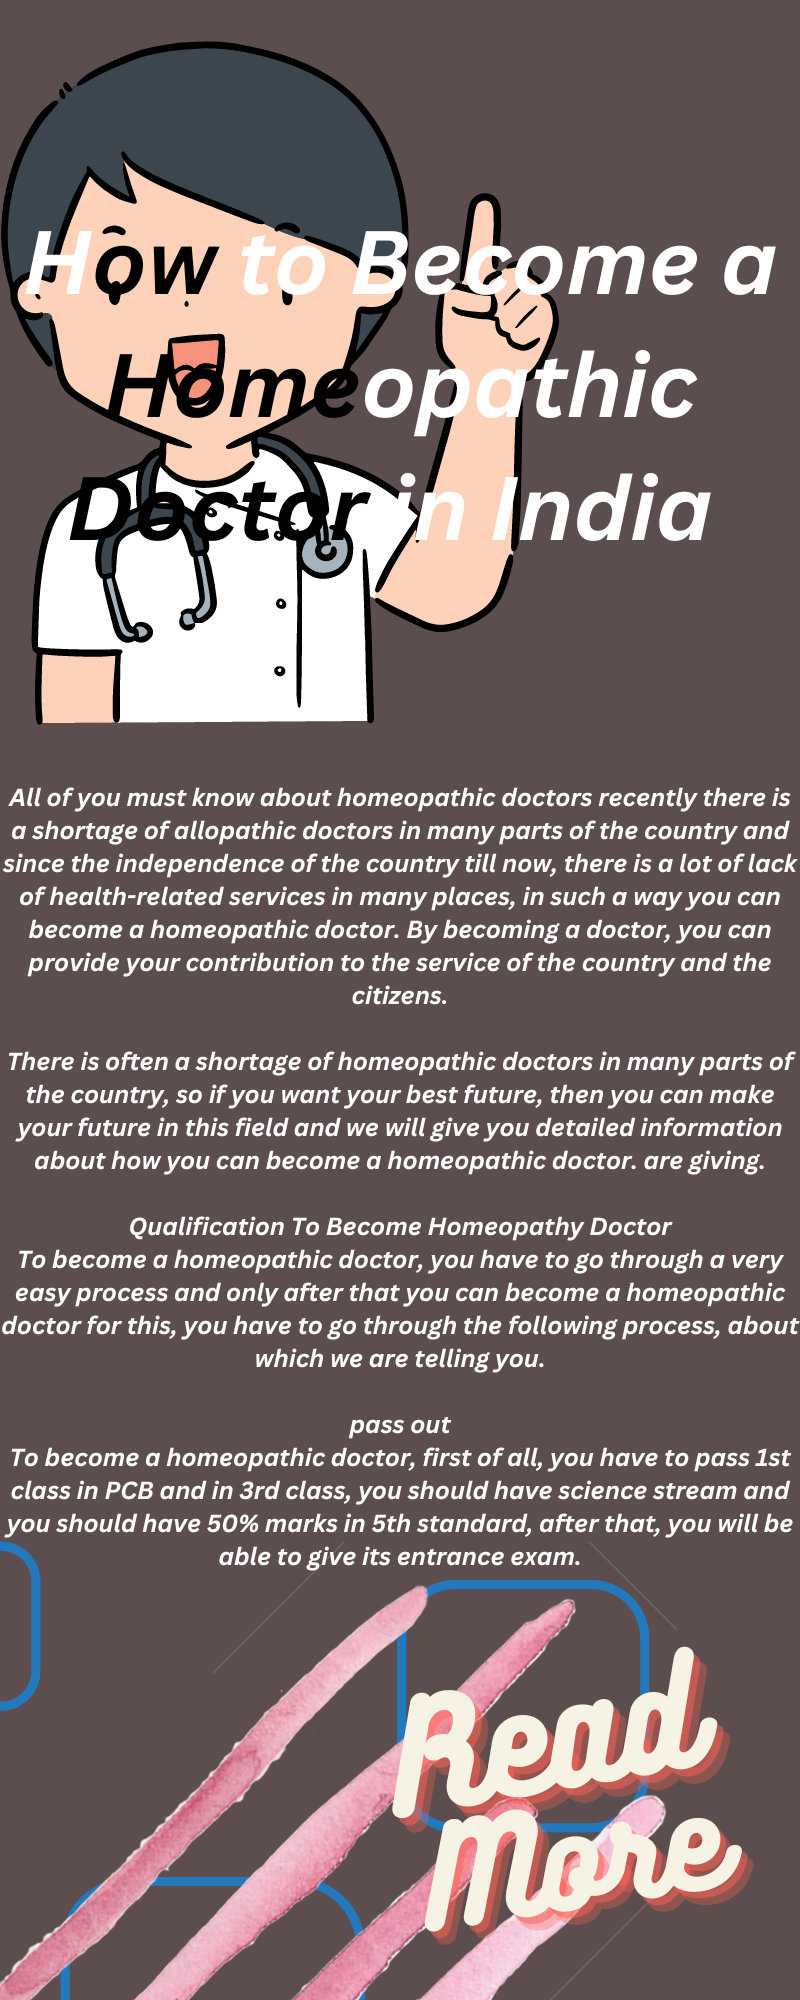 How to Become a Homeopathic Doctor in India